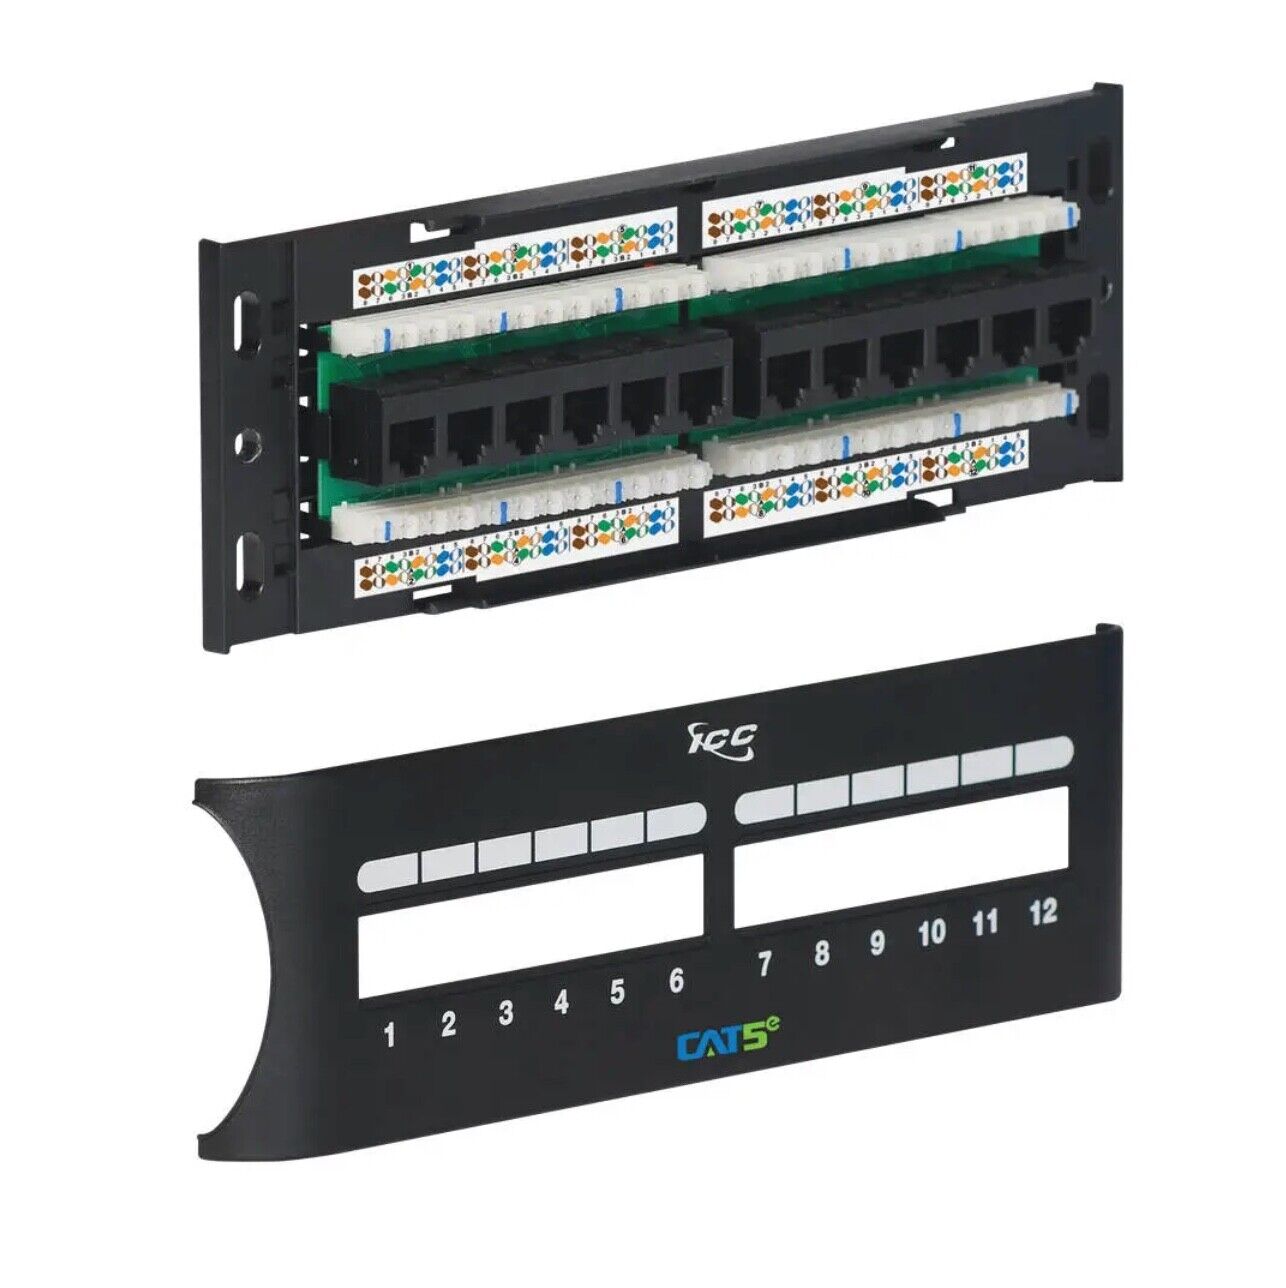 ICC CAT5e Zero-U Front Access Patch Panel with 12 Ports (ICMPP12FXE) - Black